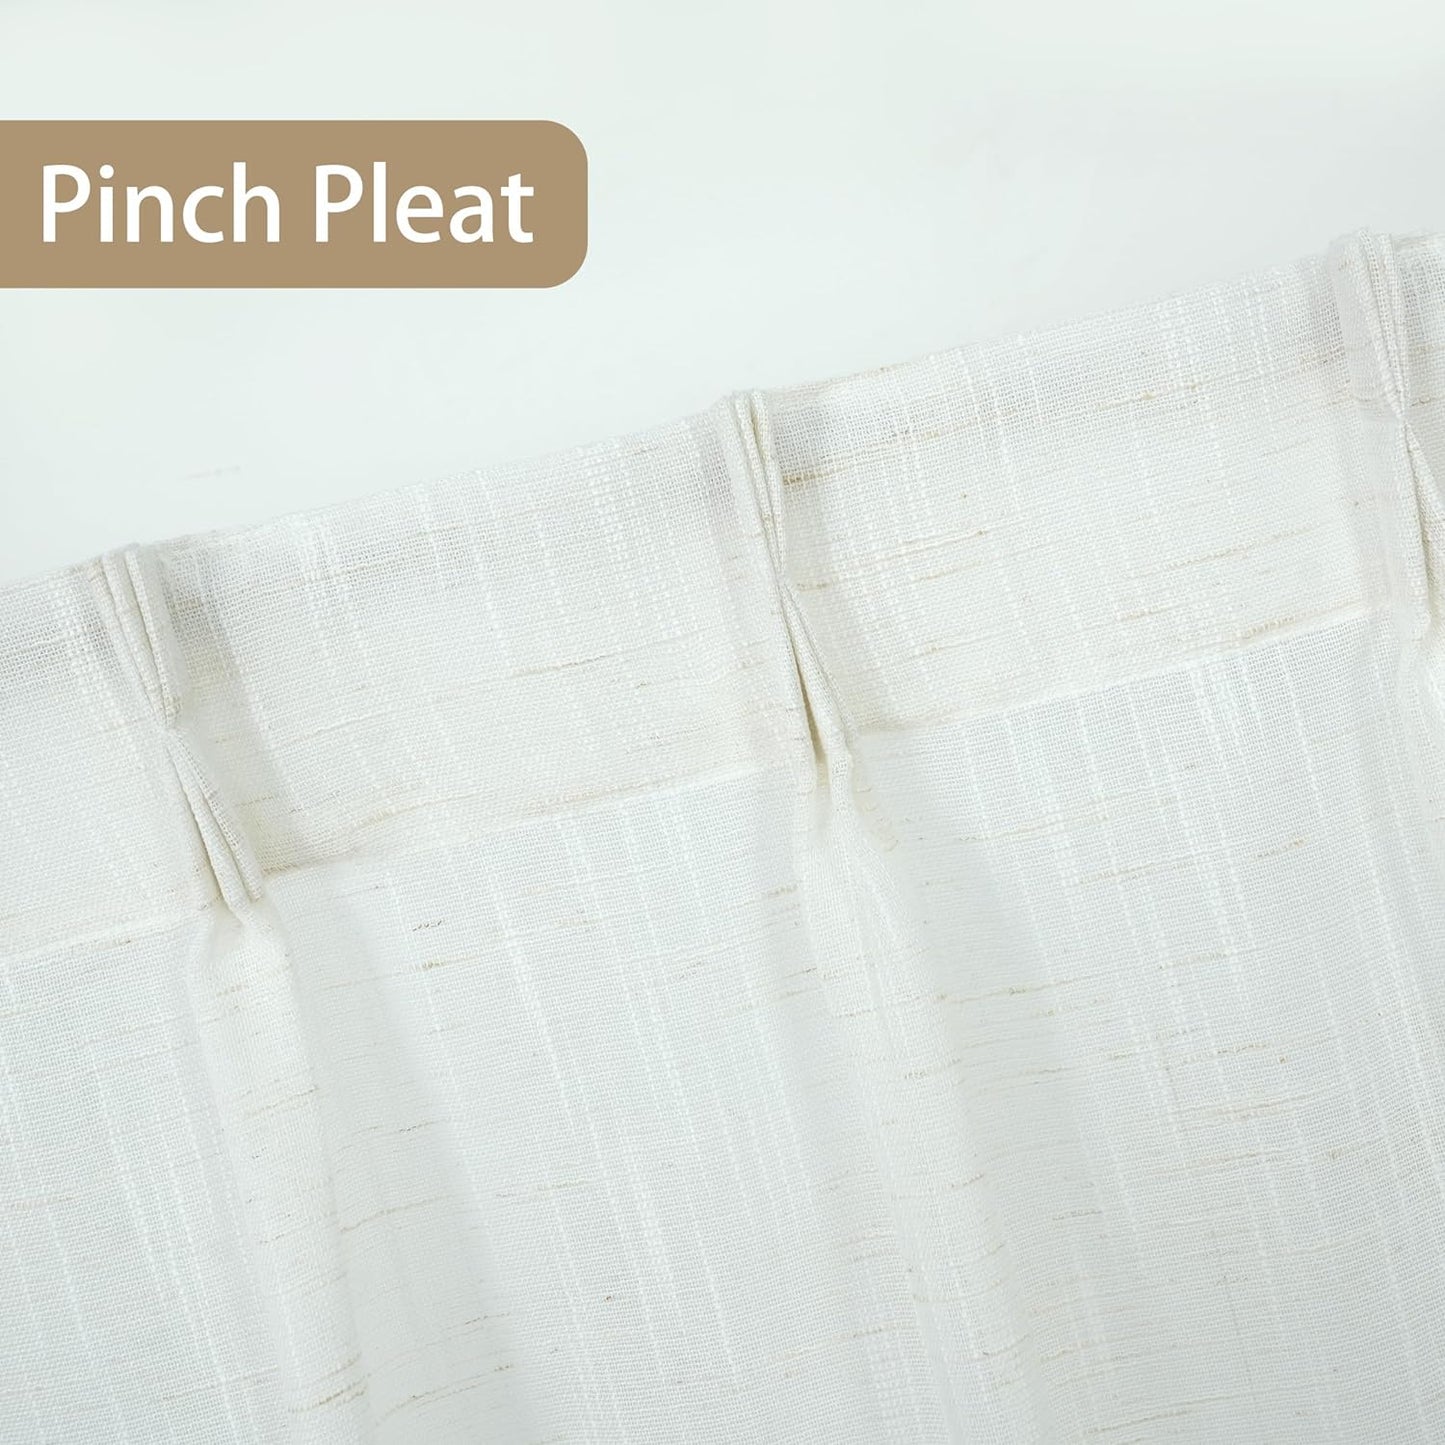 Driftaway Pinch Pleat Kitchen Curtains Linen Textured Short Linen Curtains for Bathroom Laundry Room Cafe Curtains Half Window Curtains 2 Panels Farmhouse Rustic Back Tabs 30 X 36 Inches Ivory Birch  DriftAway   